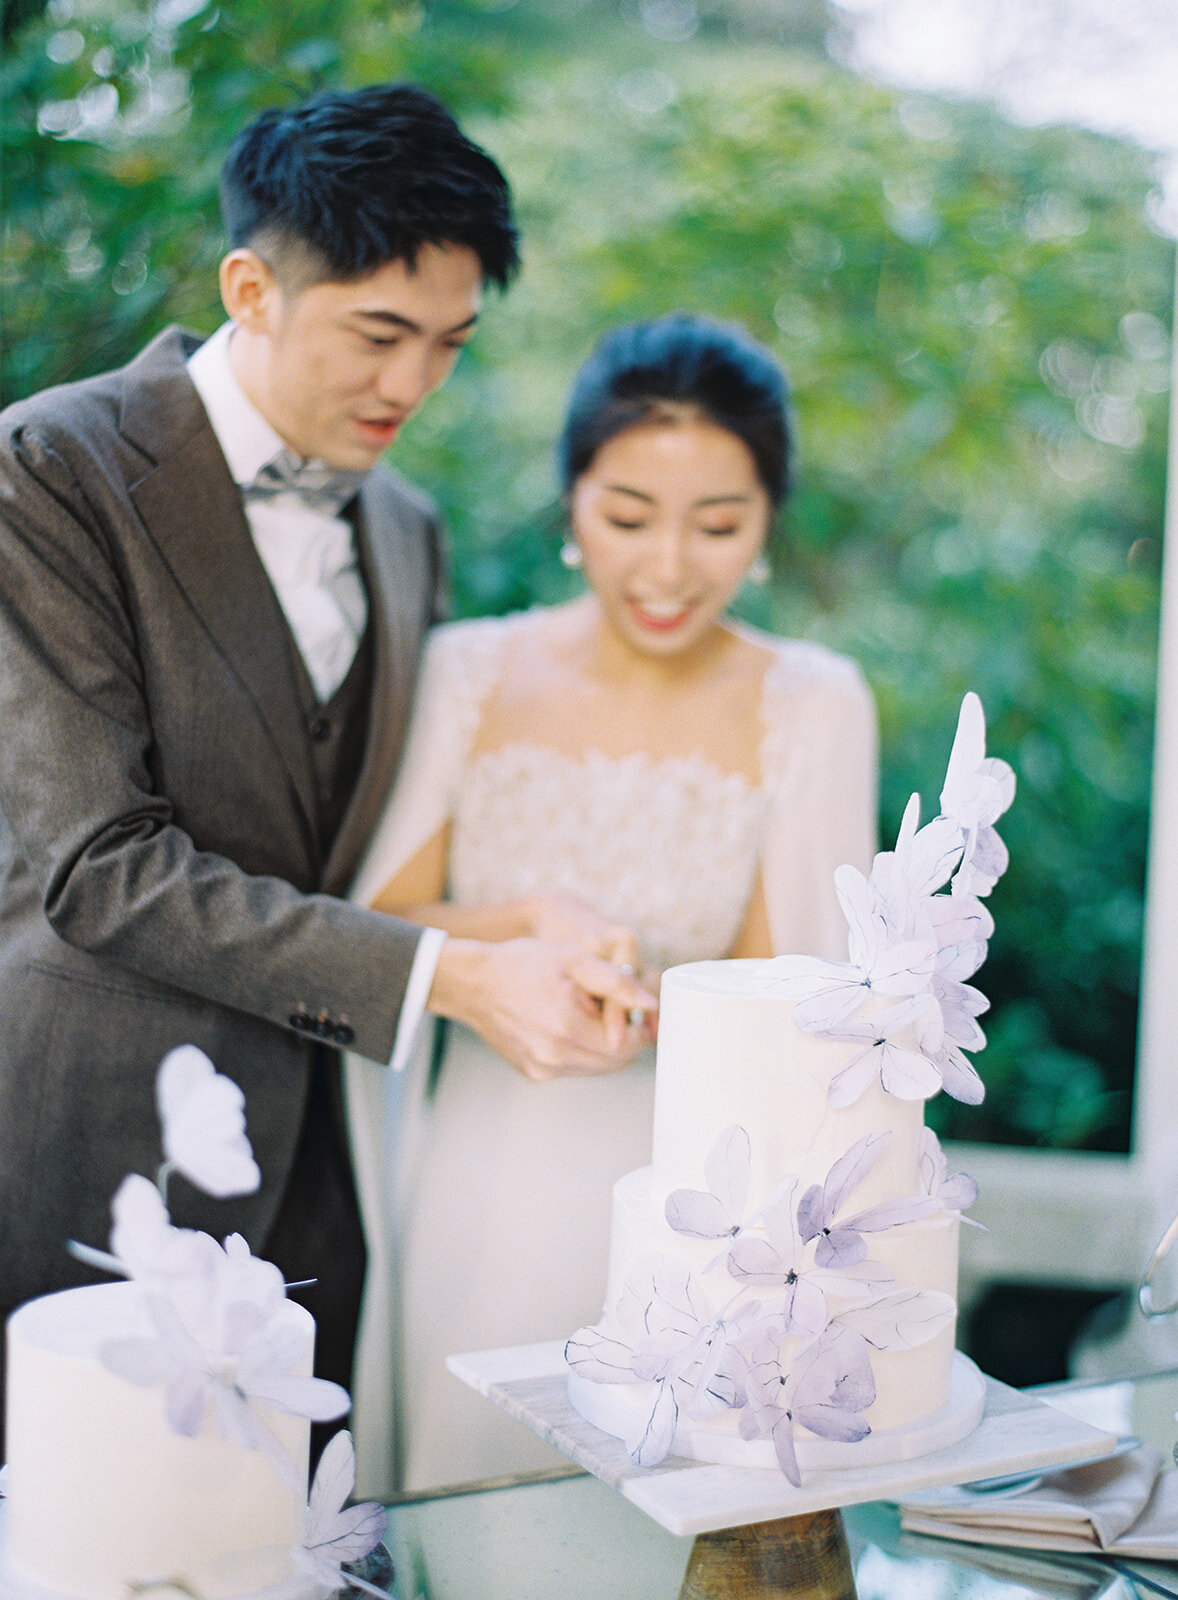 bride and groom cutting butterfly cake